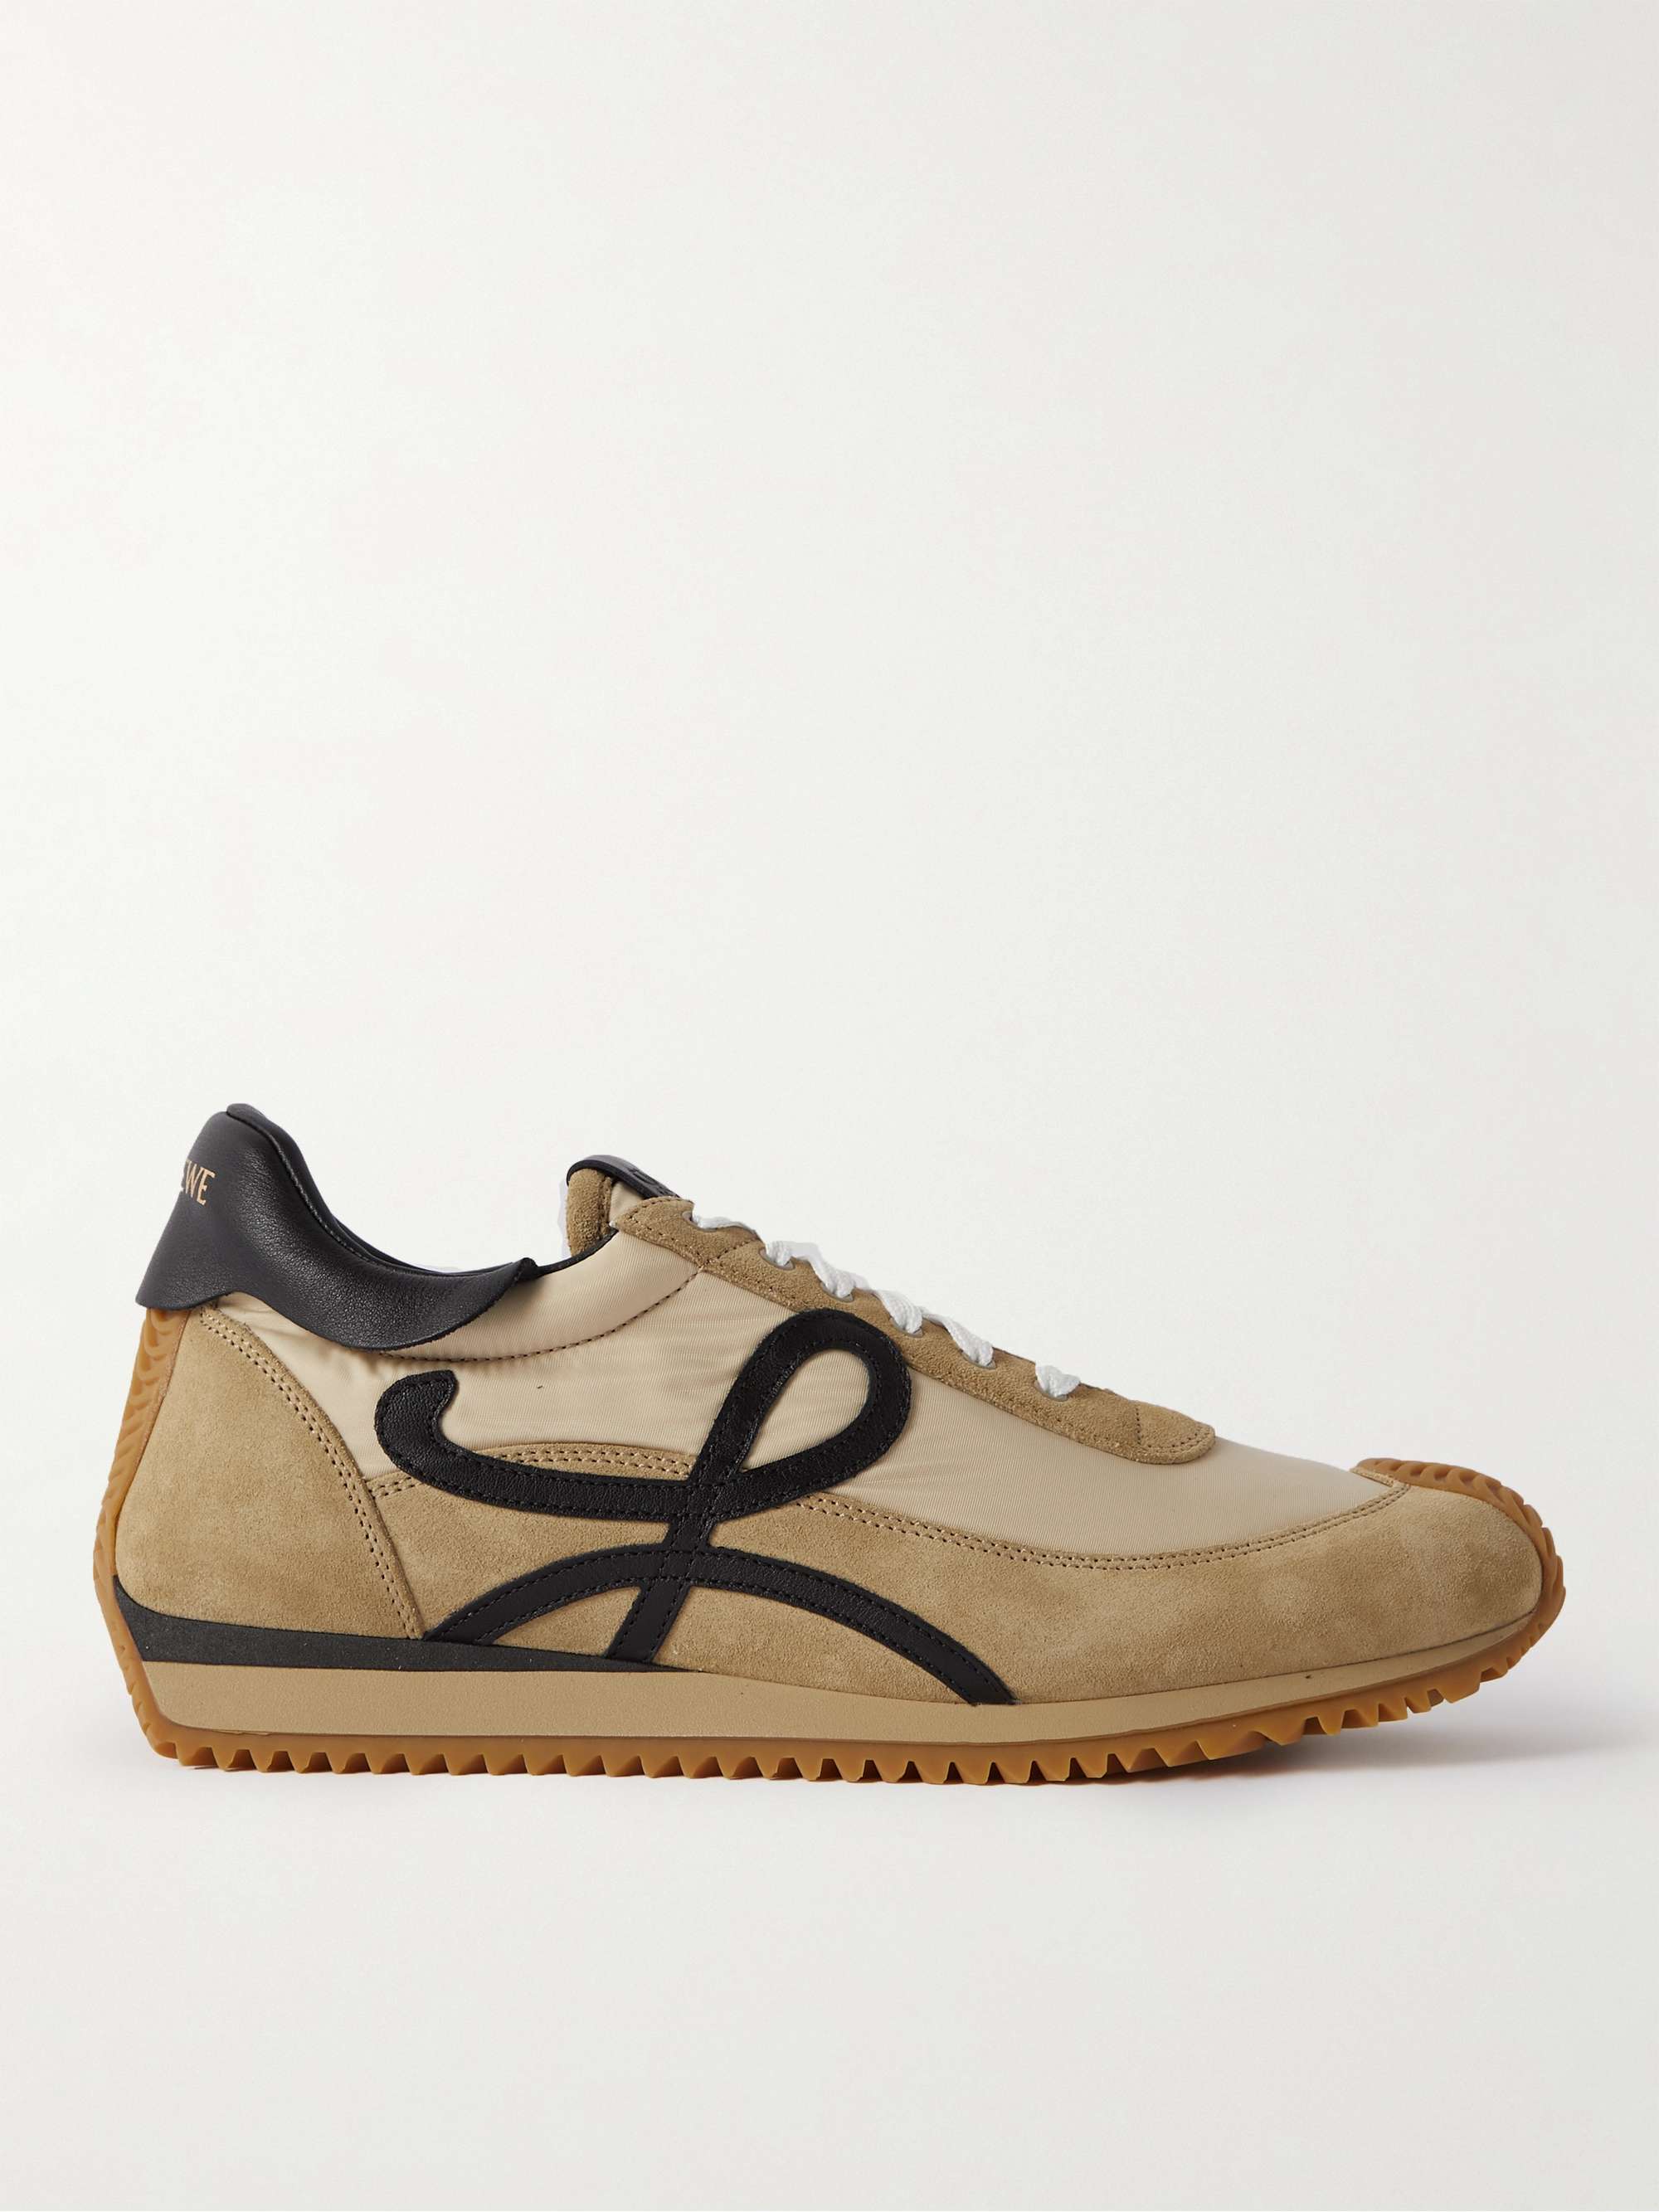 LOEWE Flow Runner Leather-Trimmed Suede and Nylon Sneakers